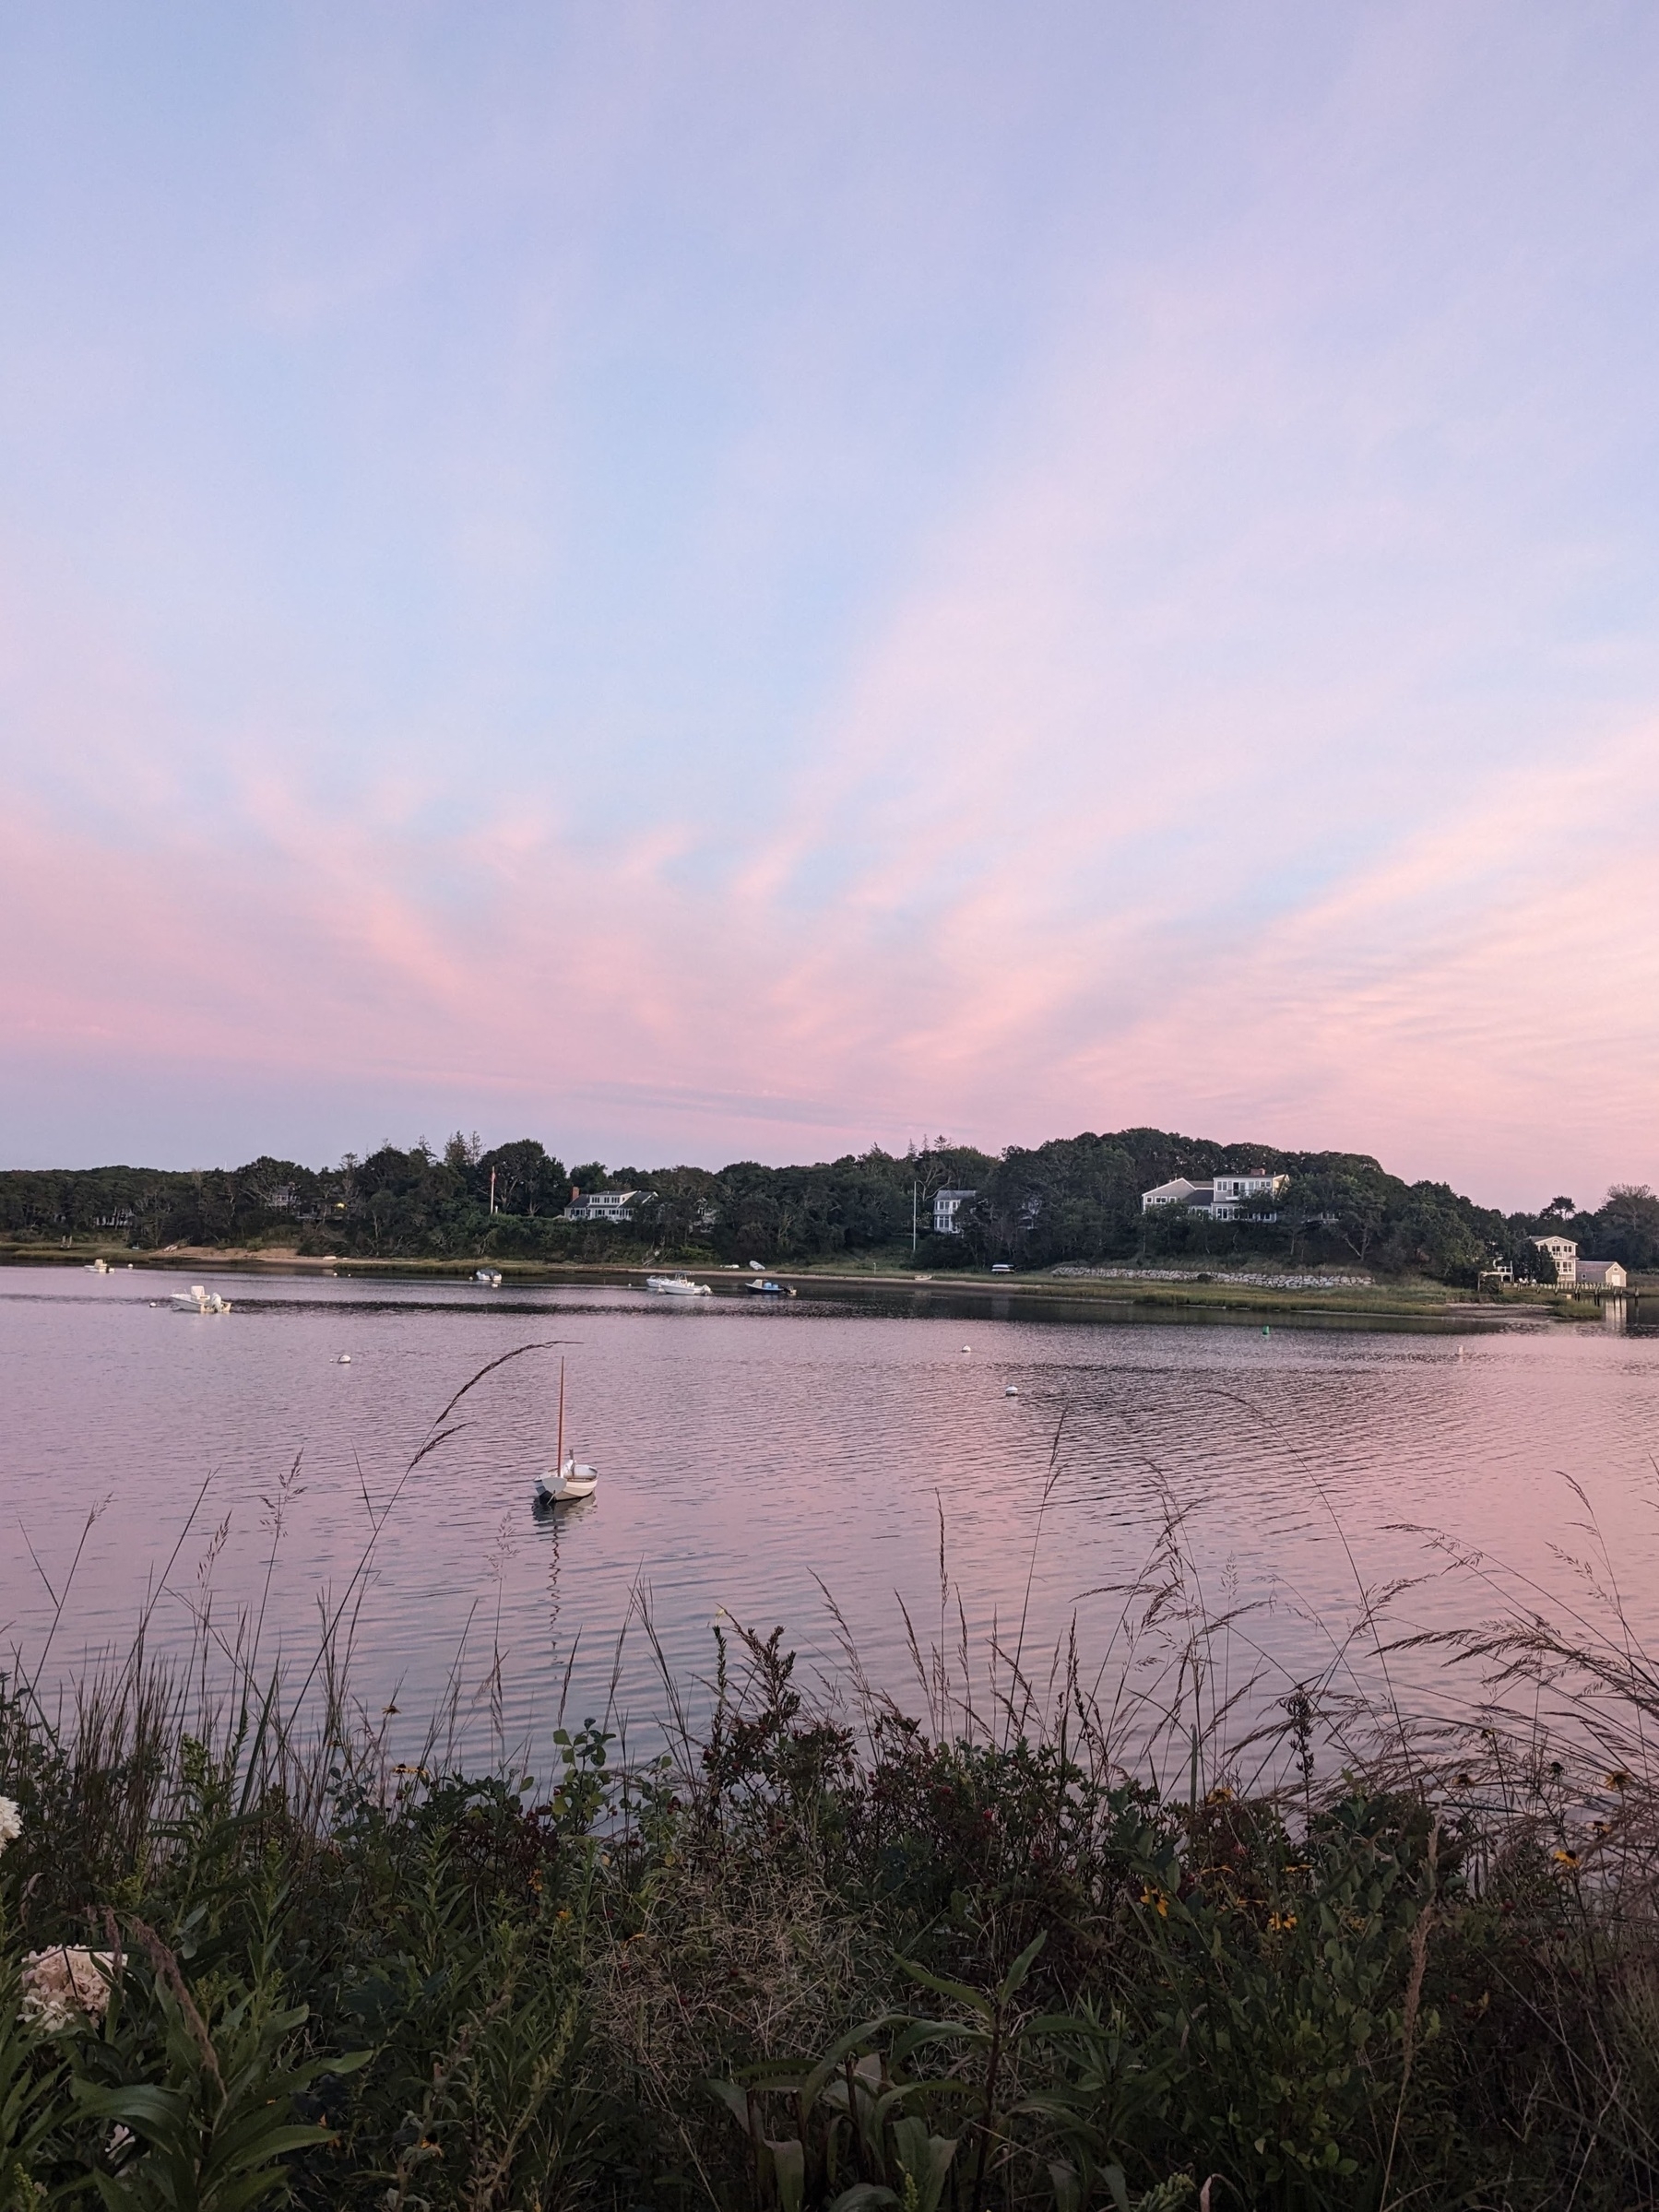 Cape Cod sunset over a cove with subtle pink and blue skies.